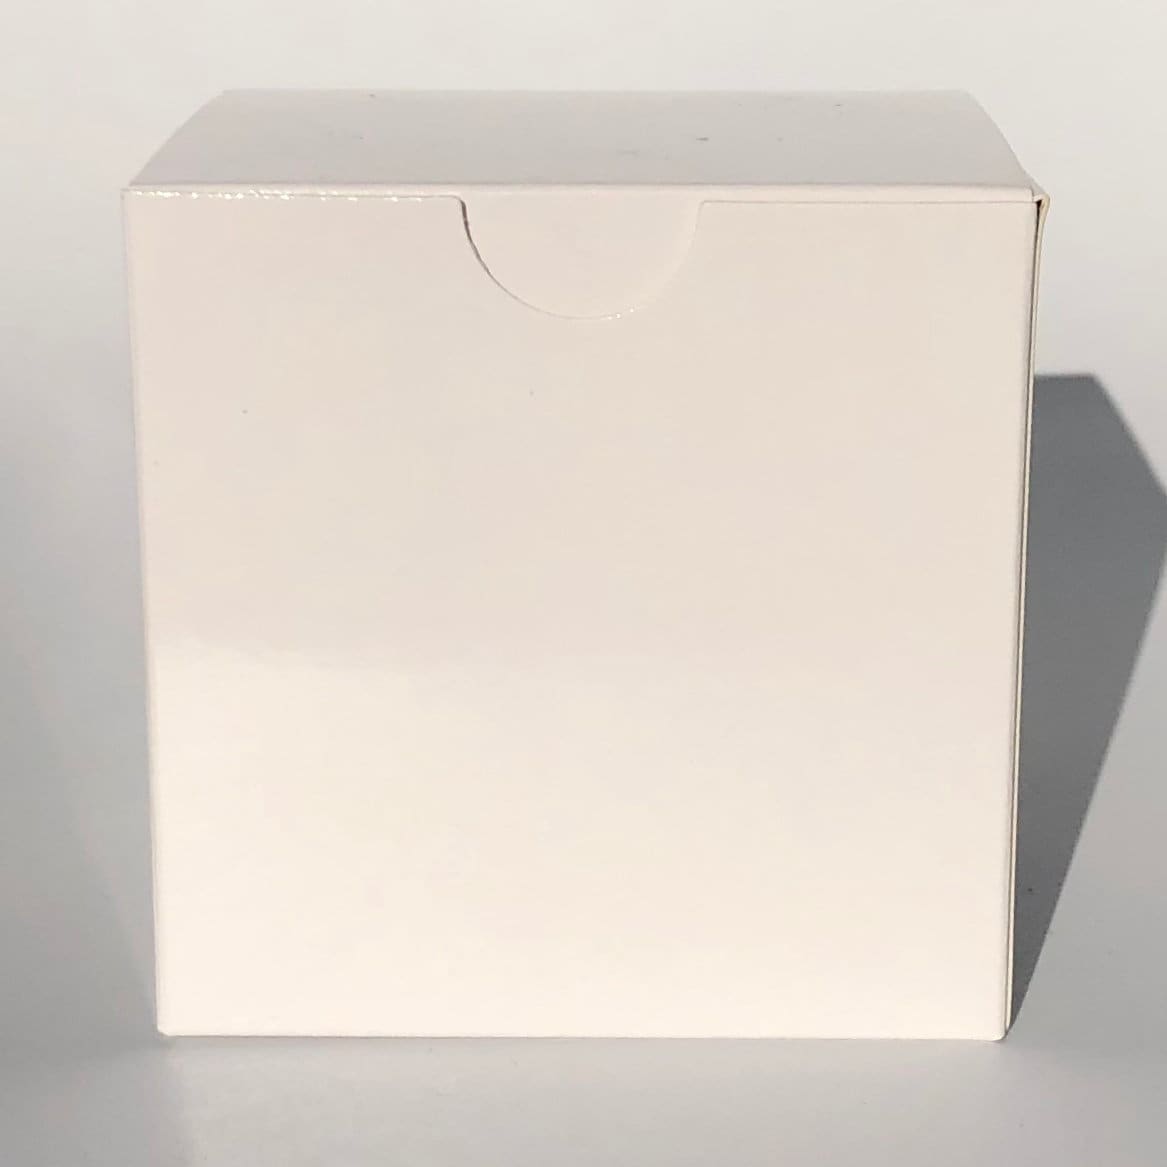 25 Pack of 3 X 3 X 3 Clear Boxes Wedding Favor Boxes 